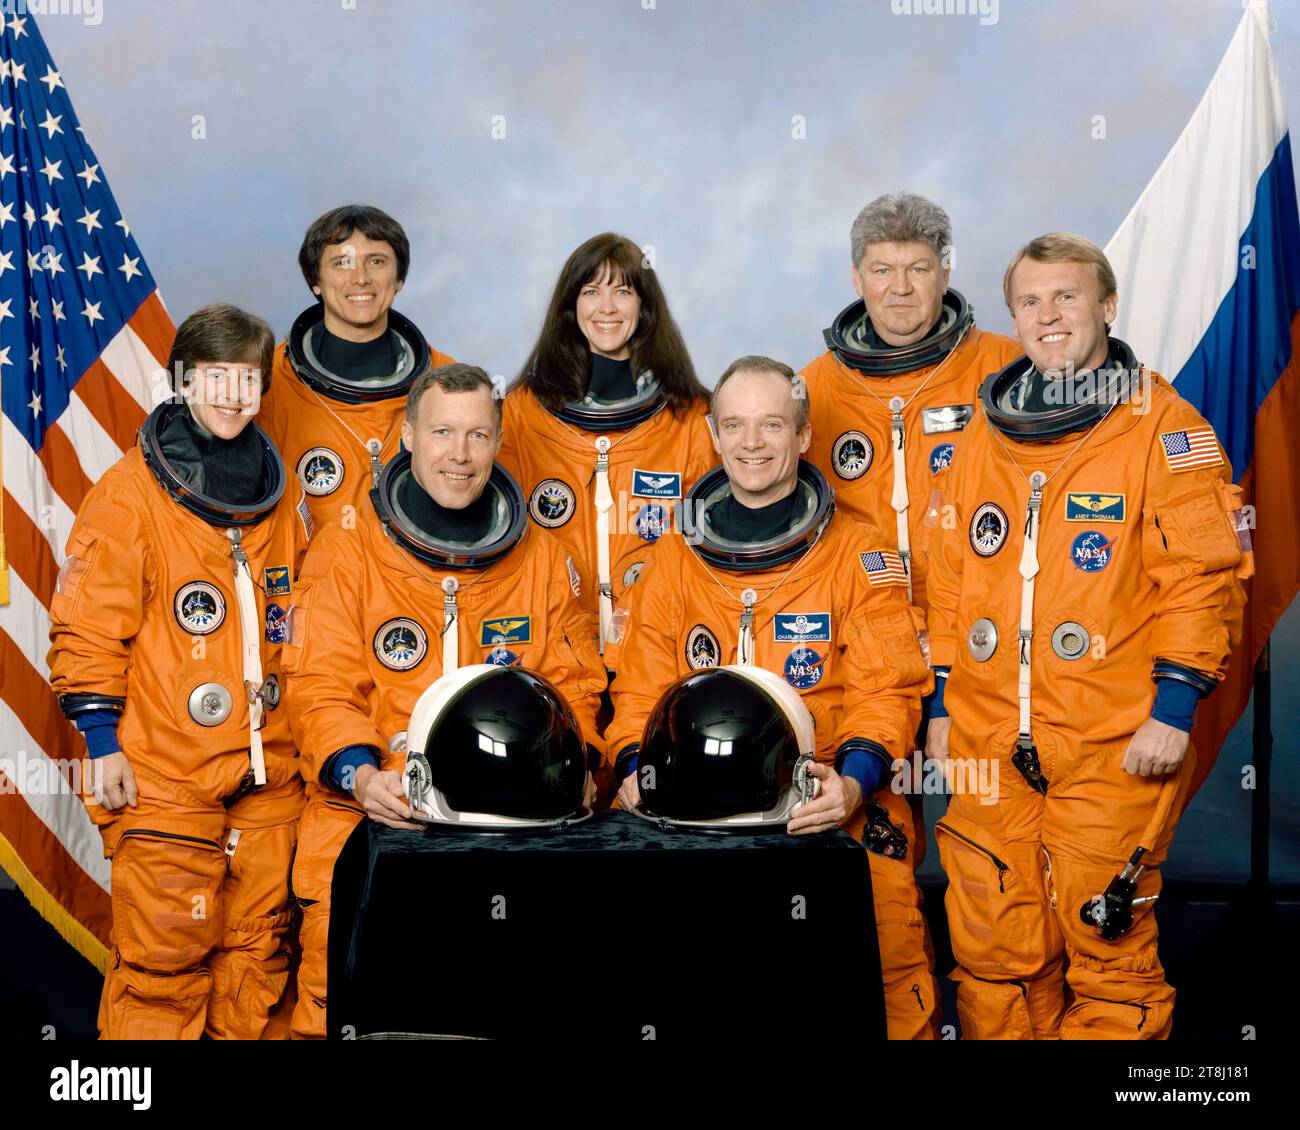 STS-91 crew portrait with the crew members. In front are Pilot Dominic C. Gorie (left) and Mission Commander Charles J. Precourt. Standing behind Gorie and Precourt are (l-r) mission specialists Wendy B. Lawrence, Franklin R. Chang-Diaz, Janet L. Kavandi, Valeriy V. Ryumin (RSA) and Andrew S. W. Thomas. Thomas, who was the last U.S. resident on Mir, returned to Earth with the STS-91 crew members. NASA Stock Photo